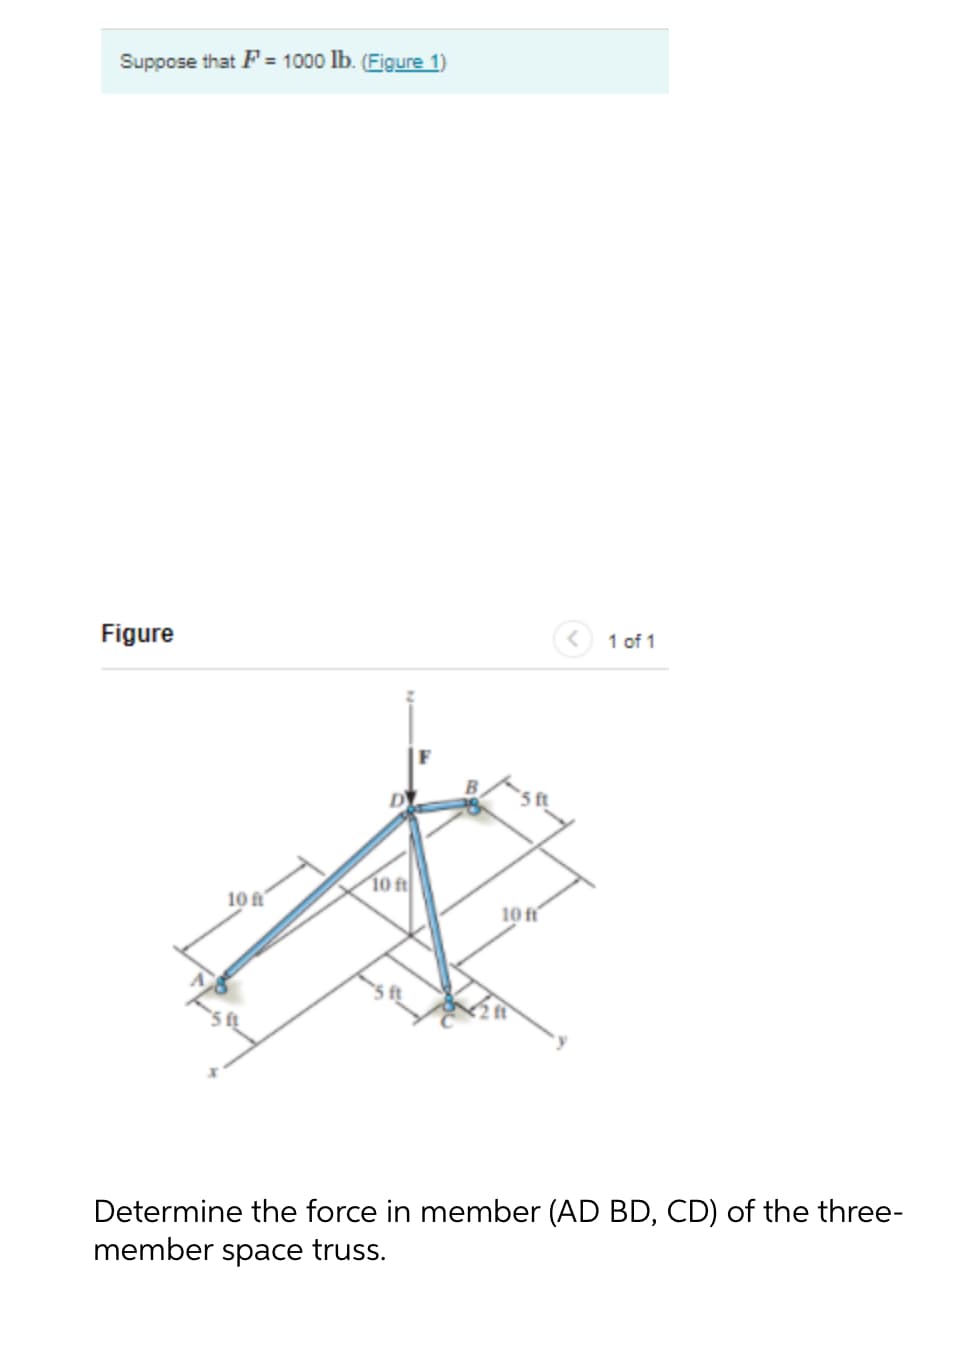 Suppose that F= 1000 lb. (Figure 1)
Figure
1 of 1
10 ft
10 ft
10 ft
Determine the force in member (AD BD, CD) of the three-
member space truss.
